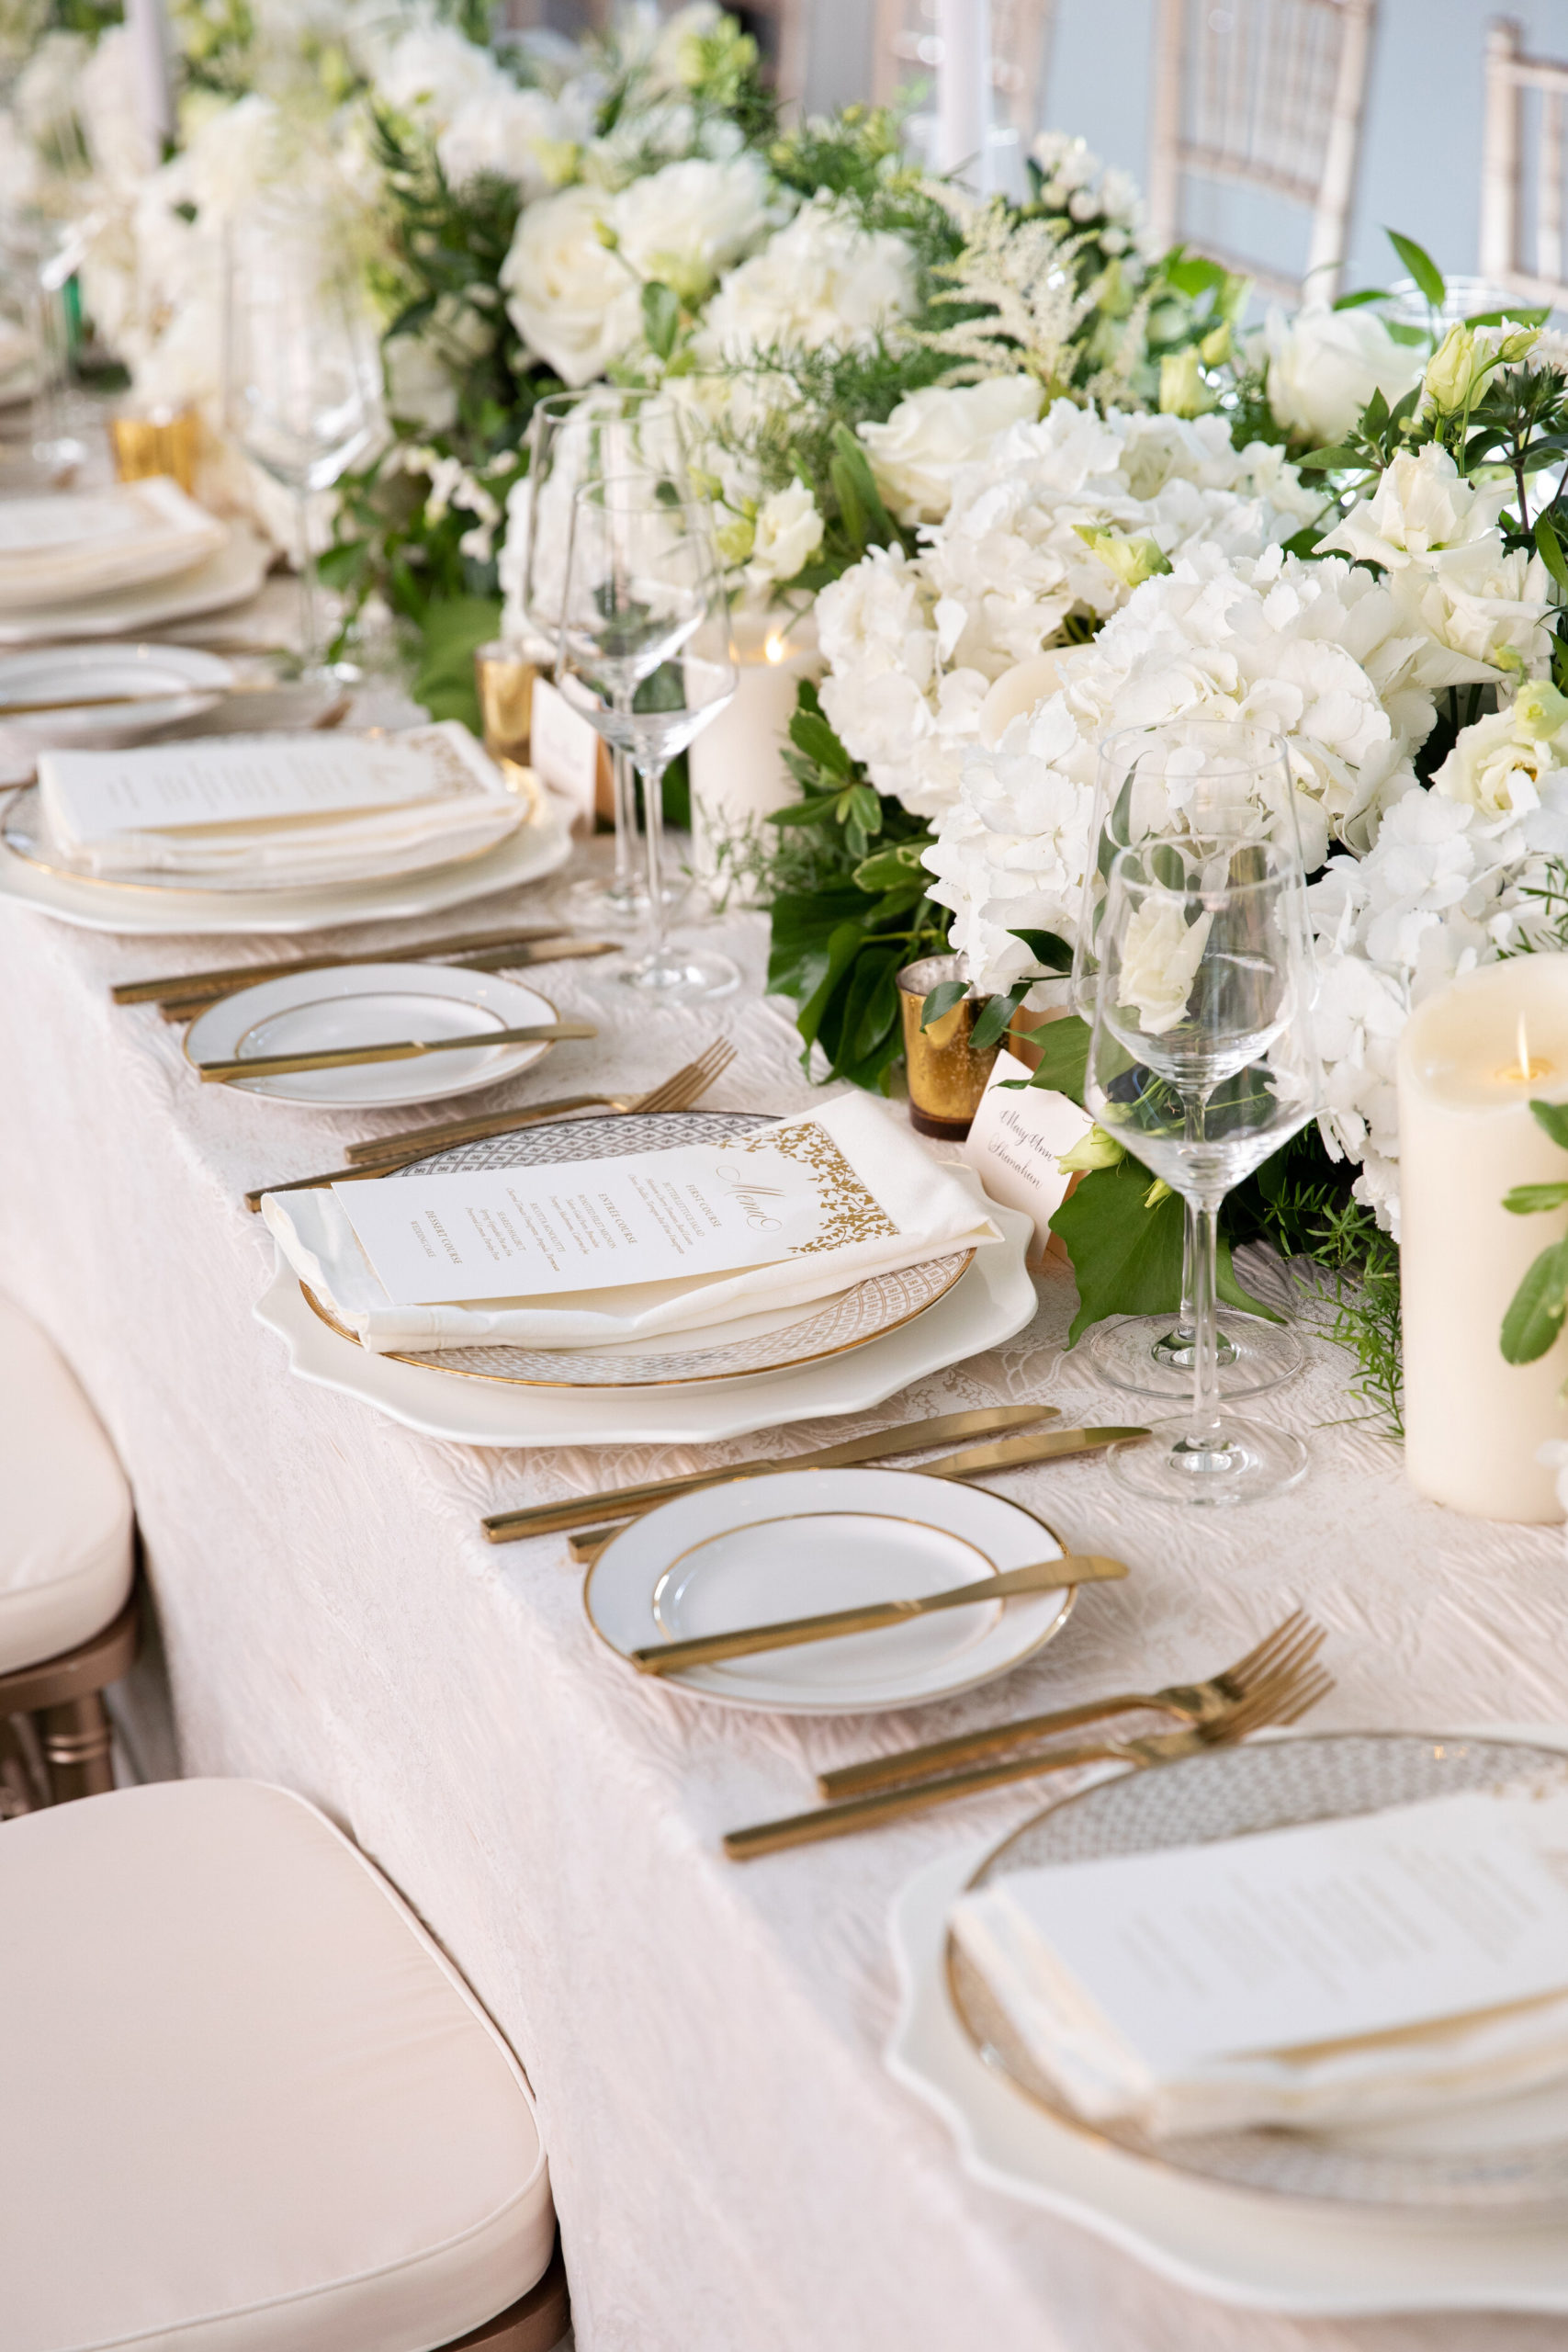 Tabletop Inspiration - Classic with Gold Accents